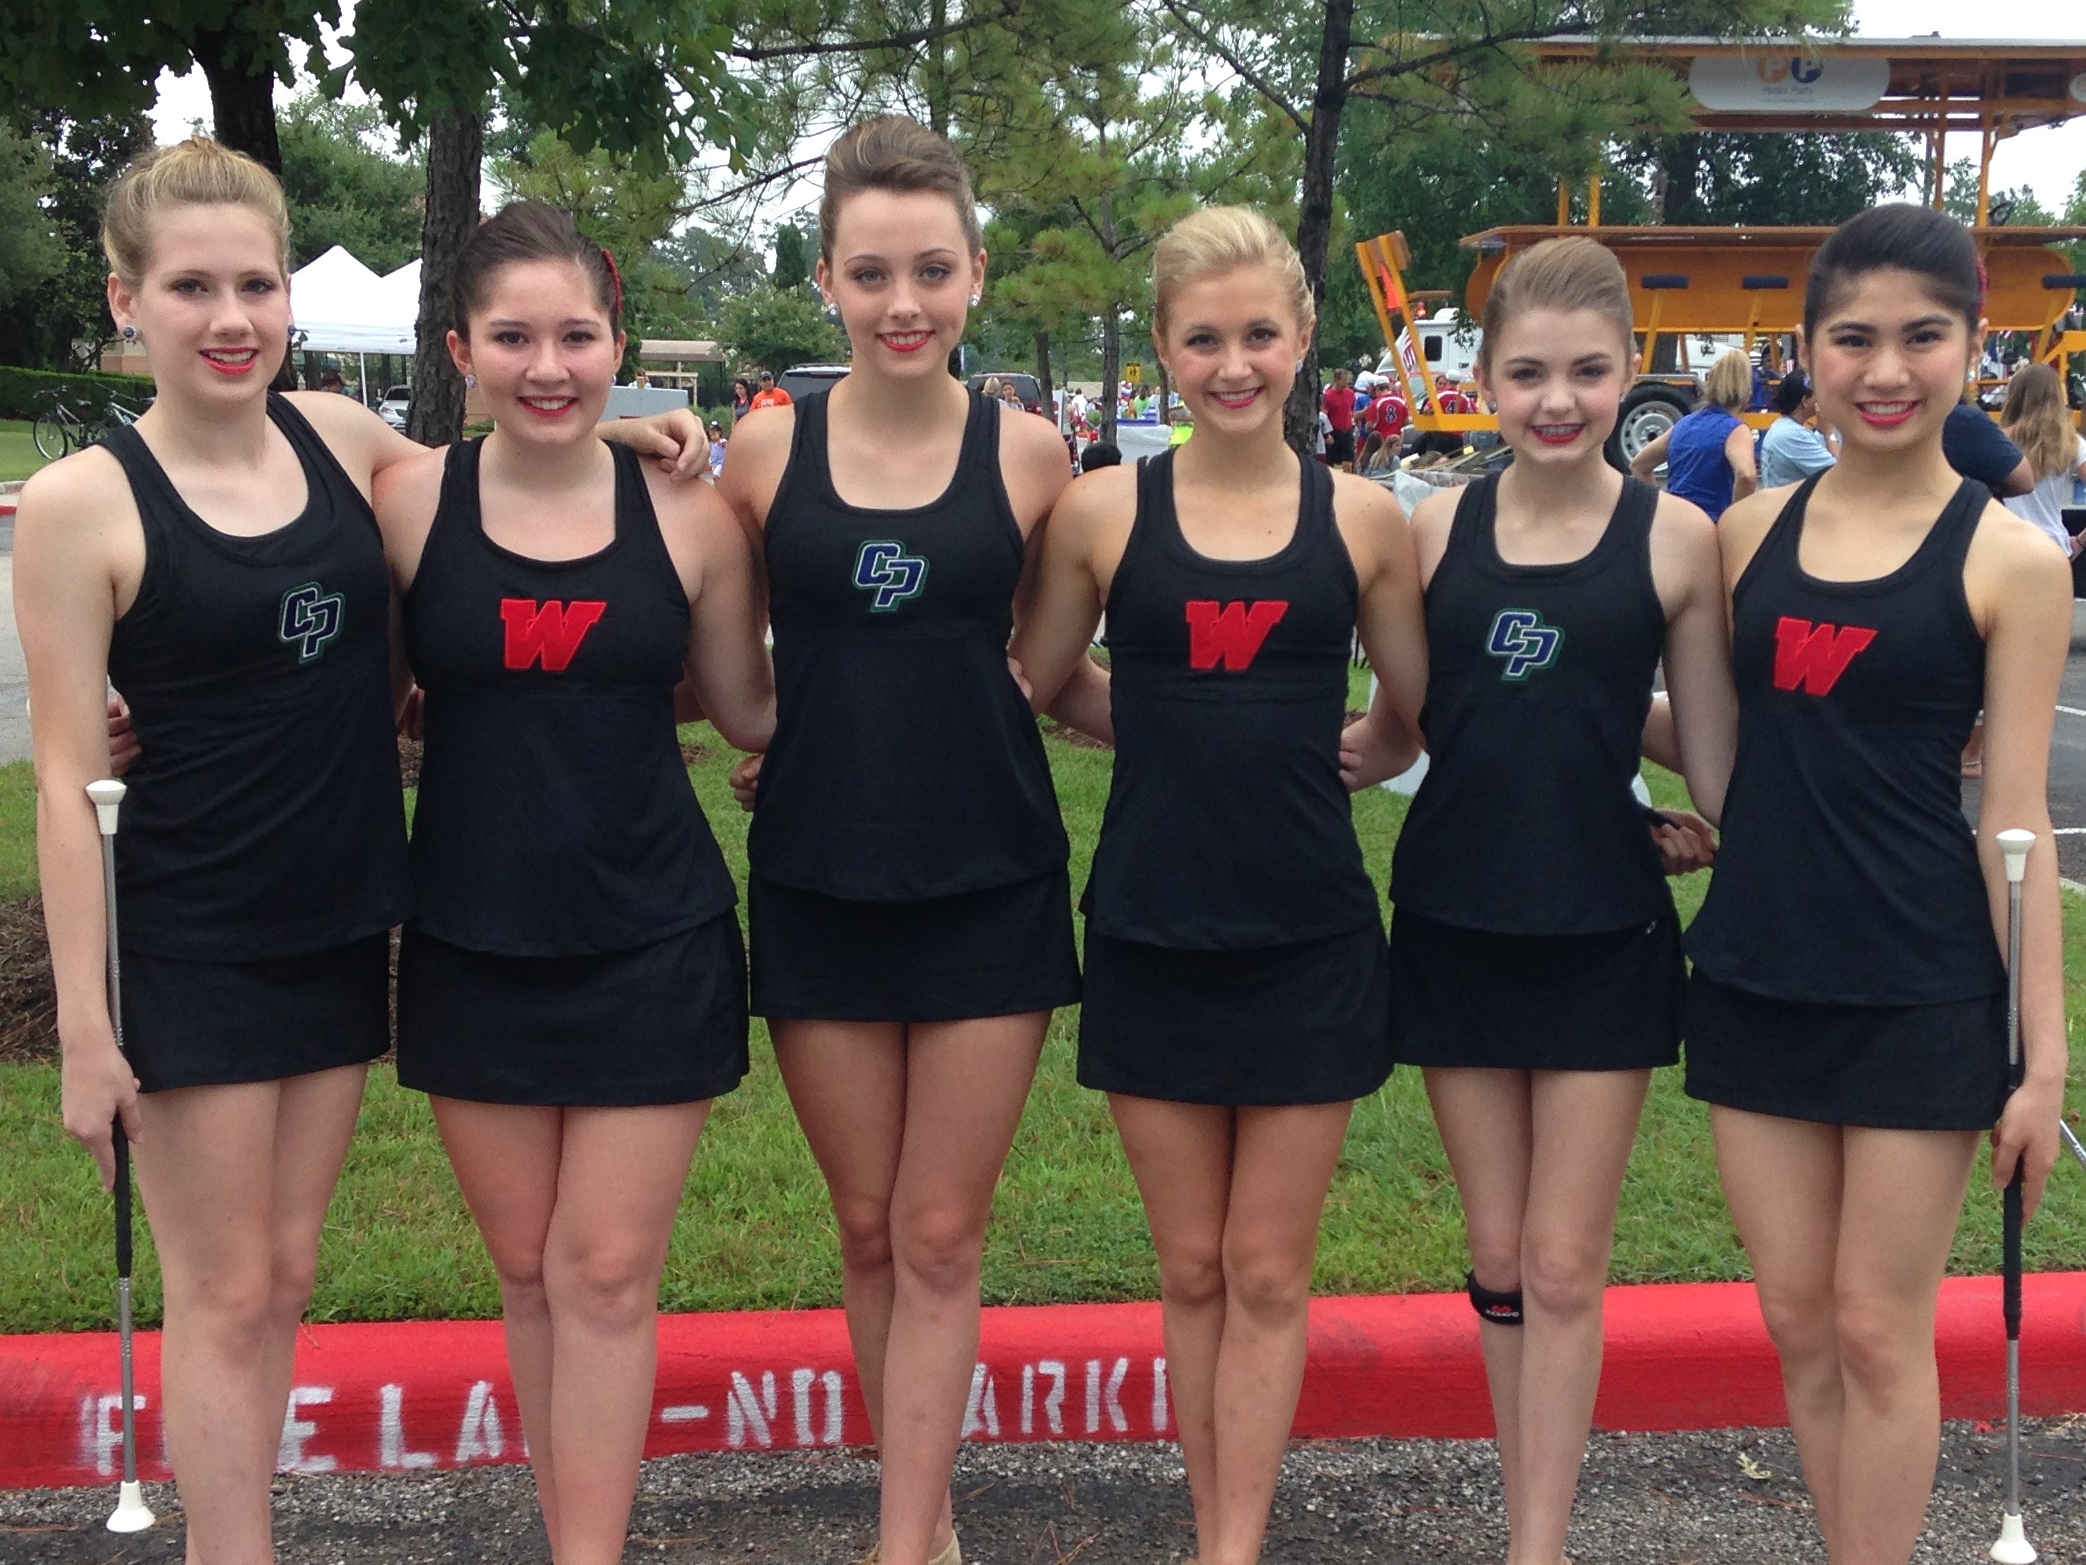 Local Feature twirlers for the two Woodlands high schools: (L to R) Rachel Hutchinson-CPHS, Jillian Romaguera-TWHS, Lindsay Richards-CPHS, Lindsey McCormick-TWHS, Allie Pellerito-CPHS and Isabel Obias-TWHS